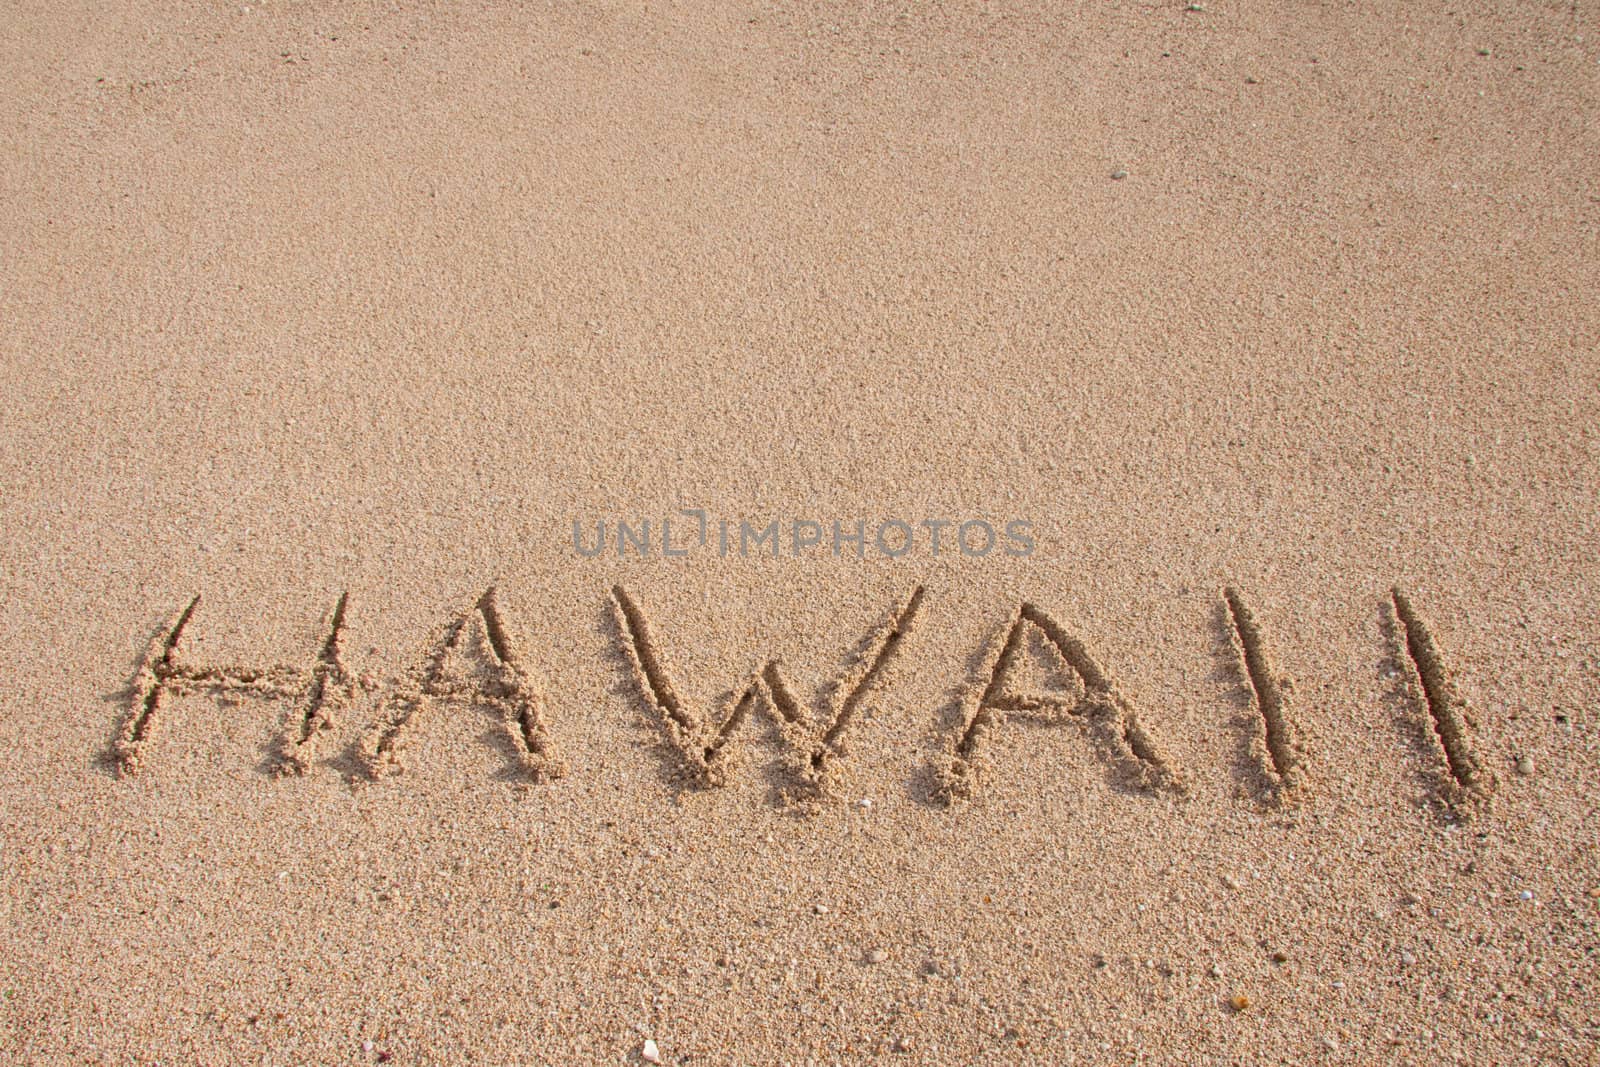 The word HAWAII is written on the beach with room for text or copy space.